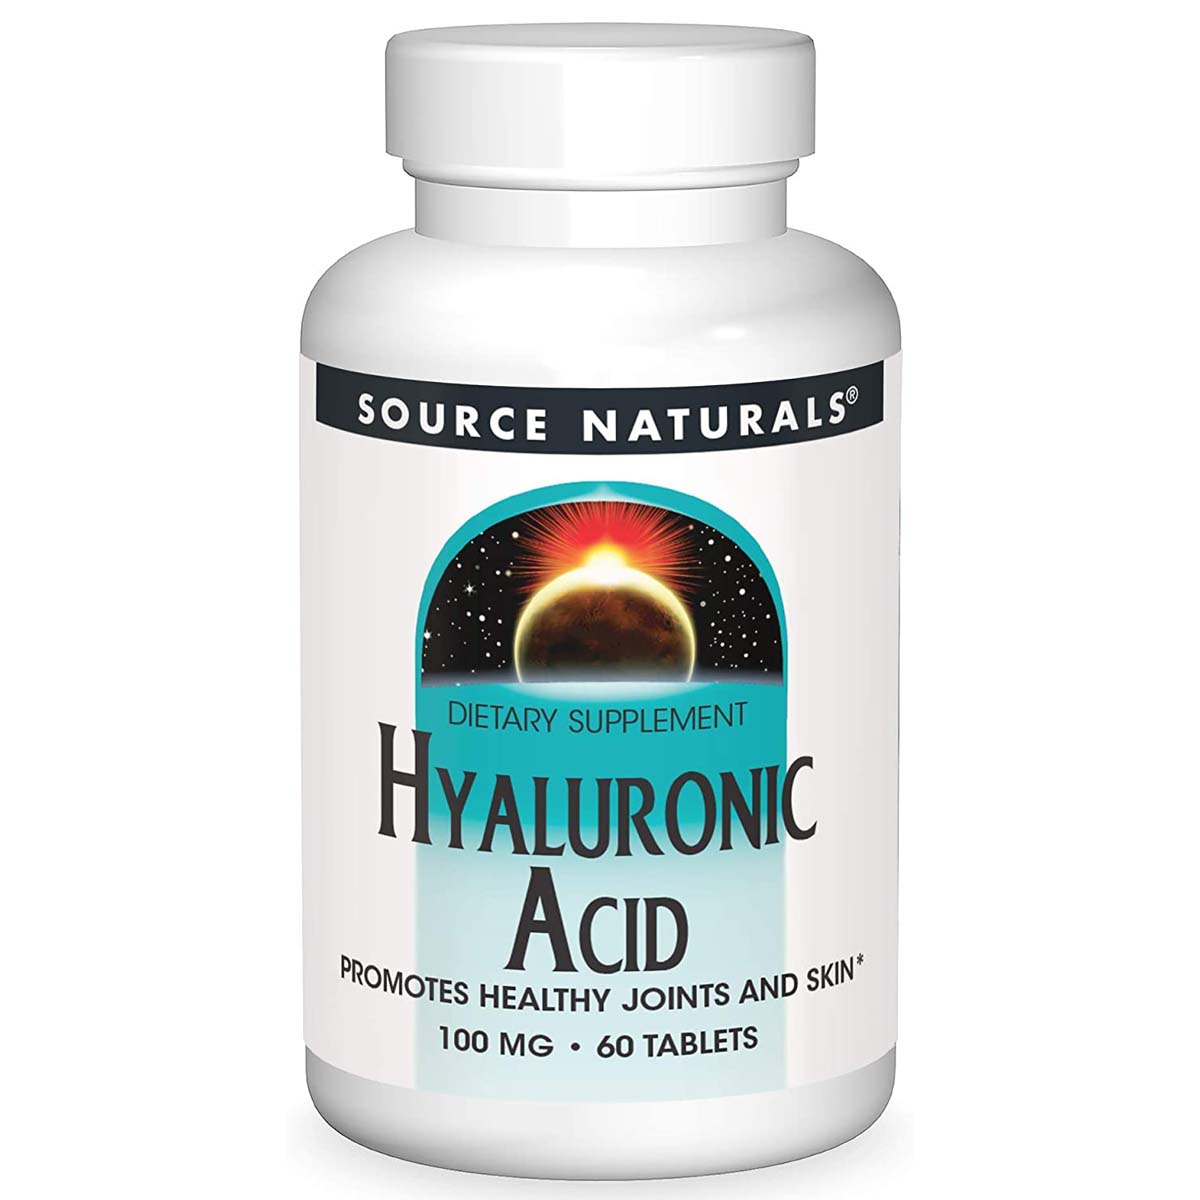 Source Naturals Hyaluronic Acid, 100 mg, 60 Tablets